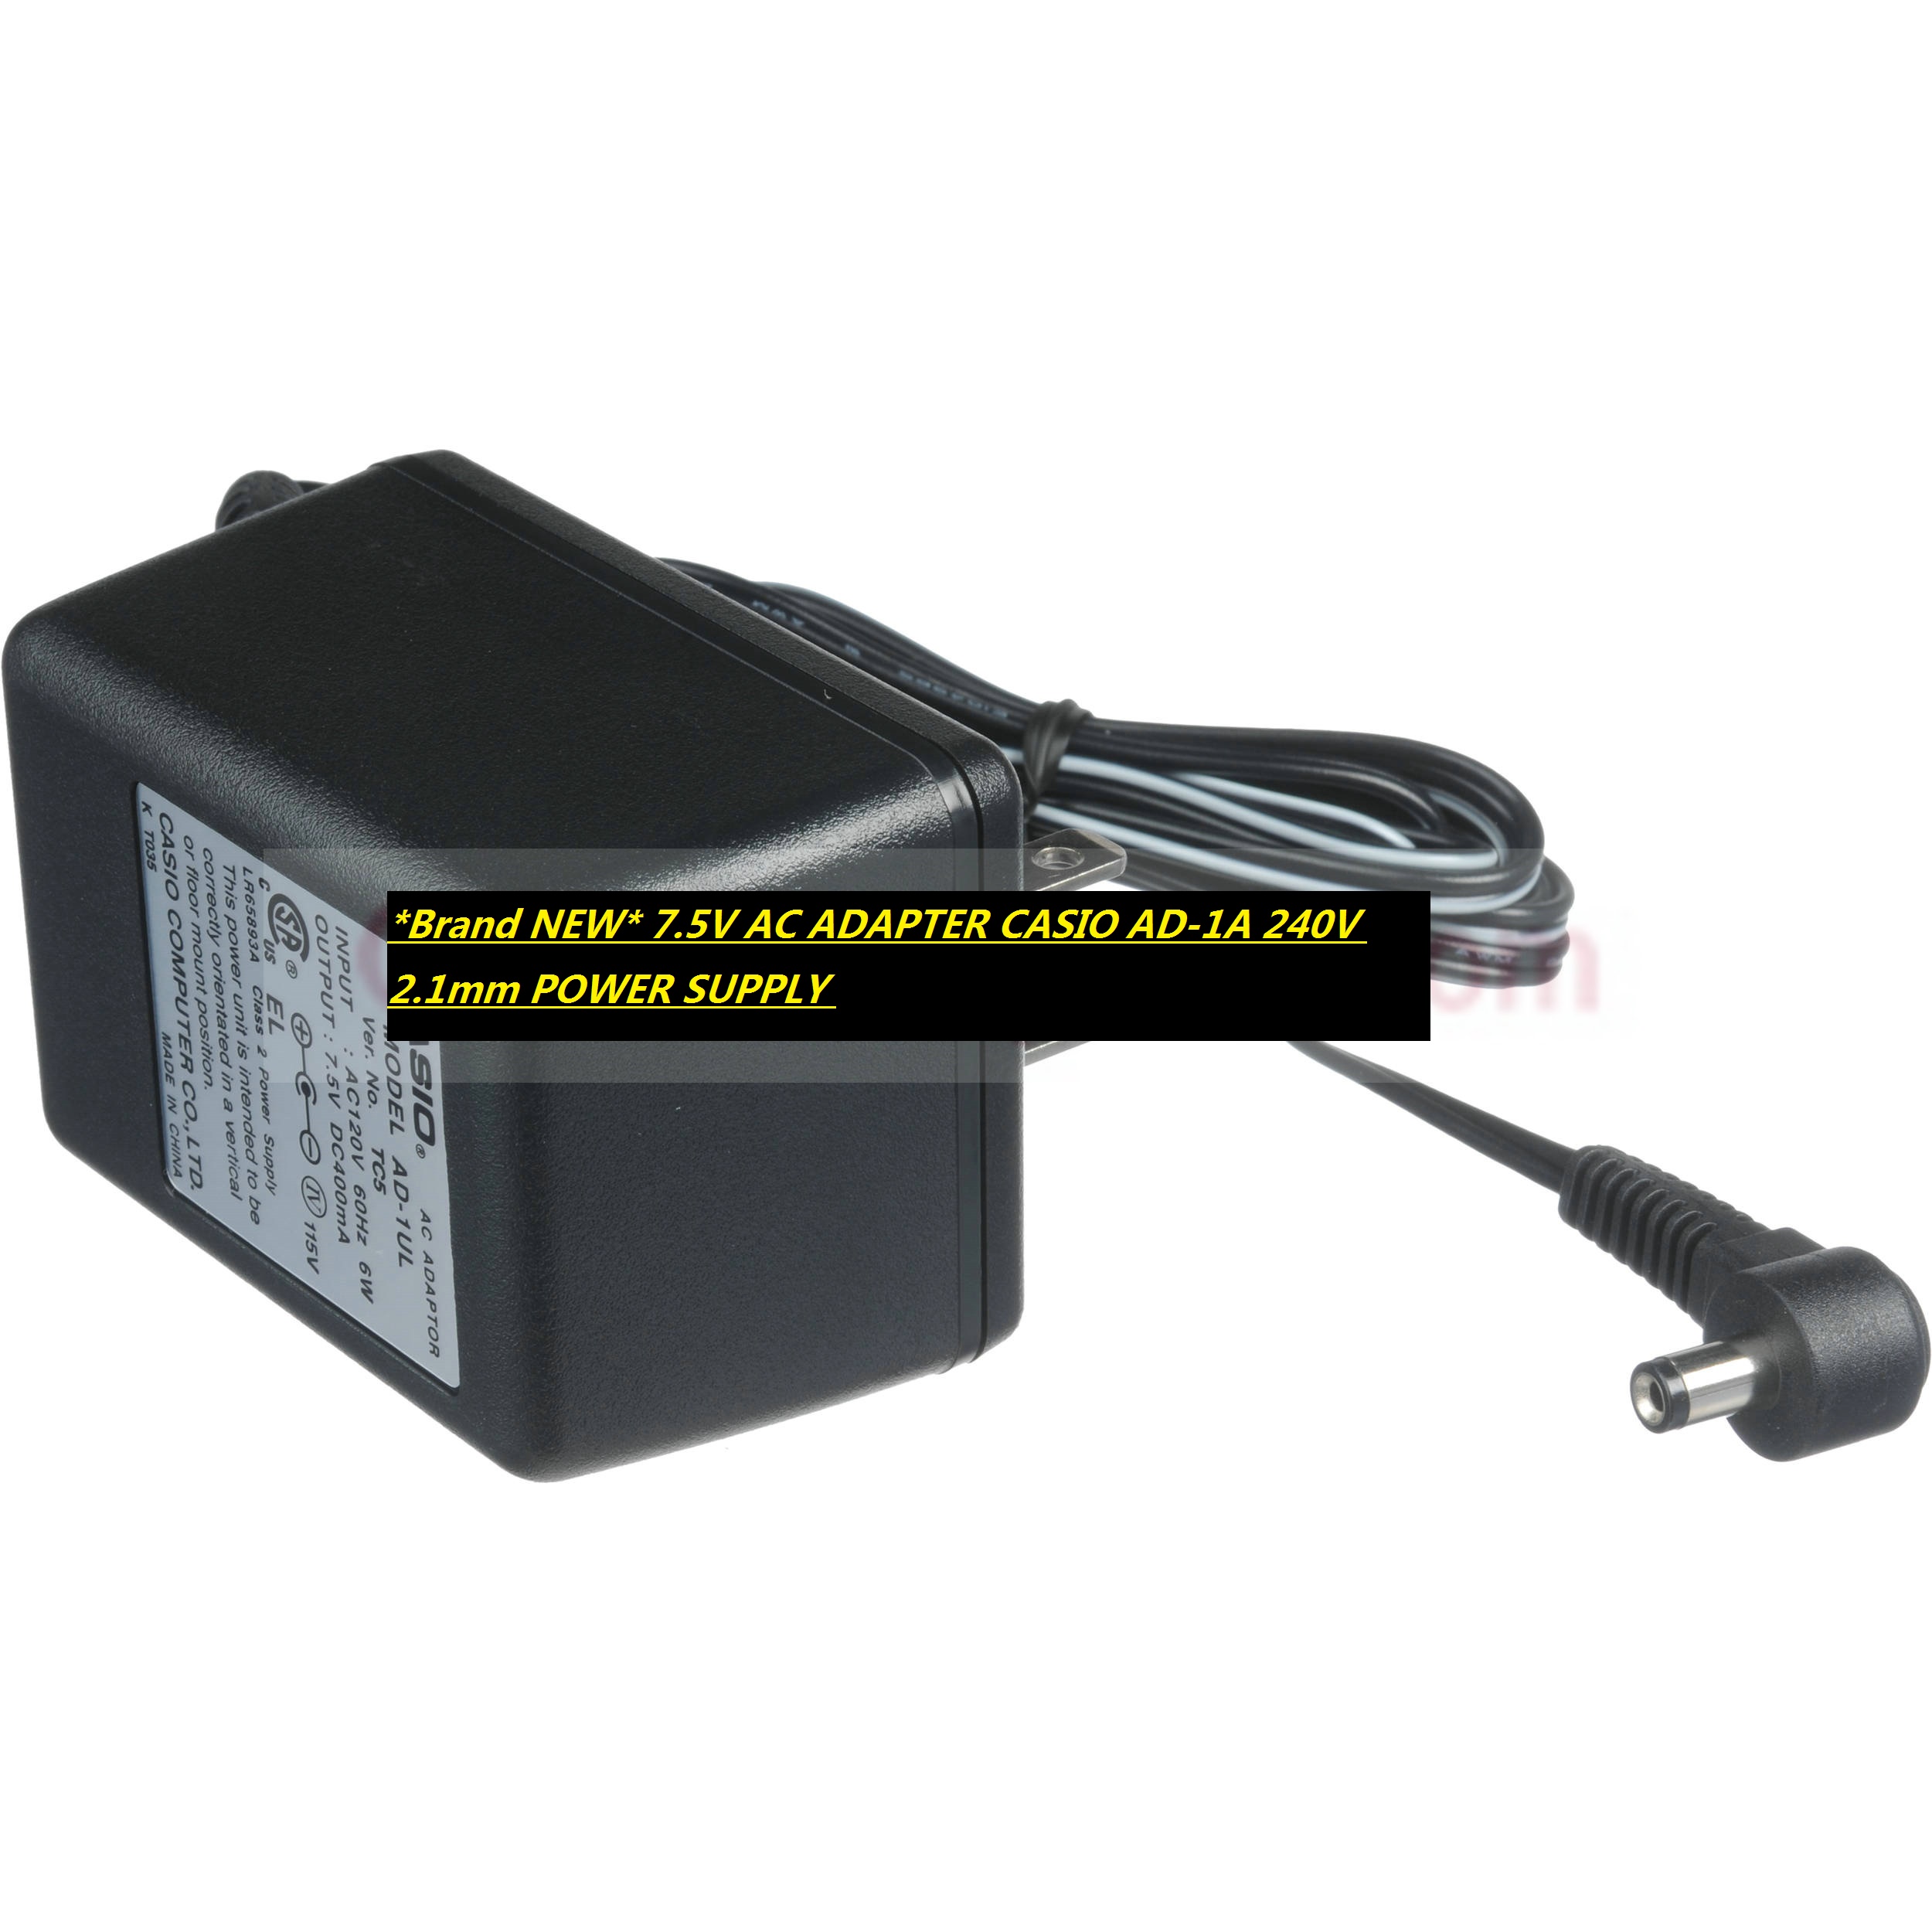 *Brand NEW* 7.5V AC ADAPTER CASIO AD-1A 240V 2.1mm POWER SUPPLY - Click Image to Close